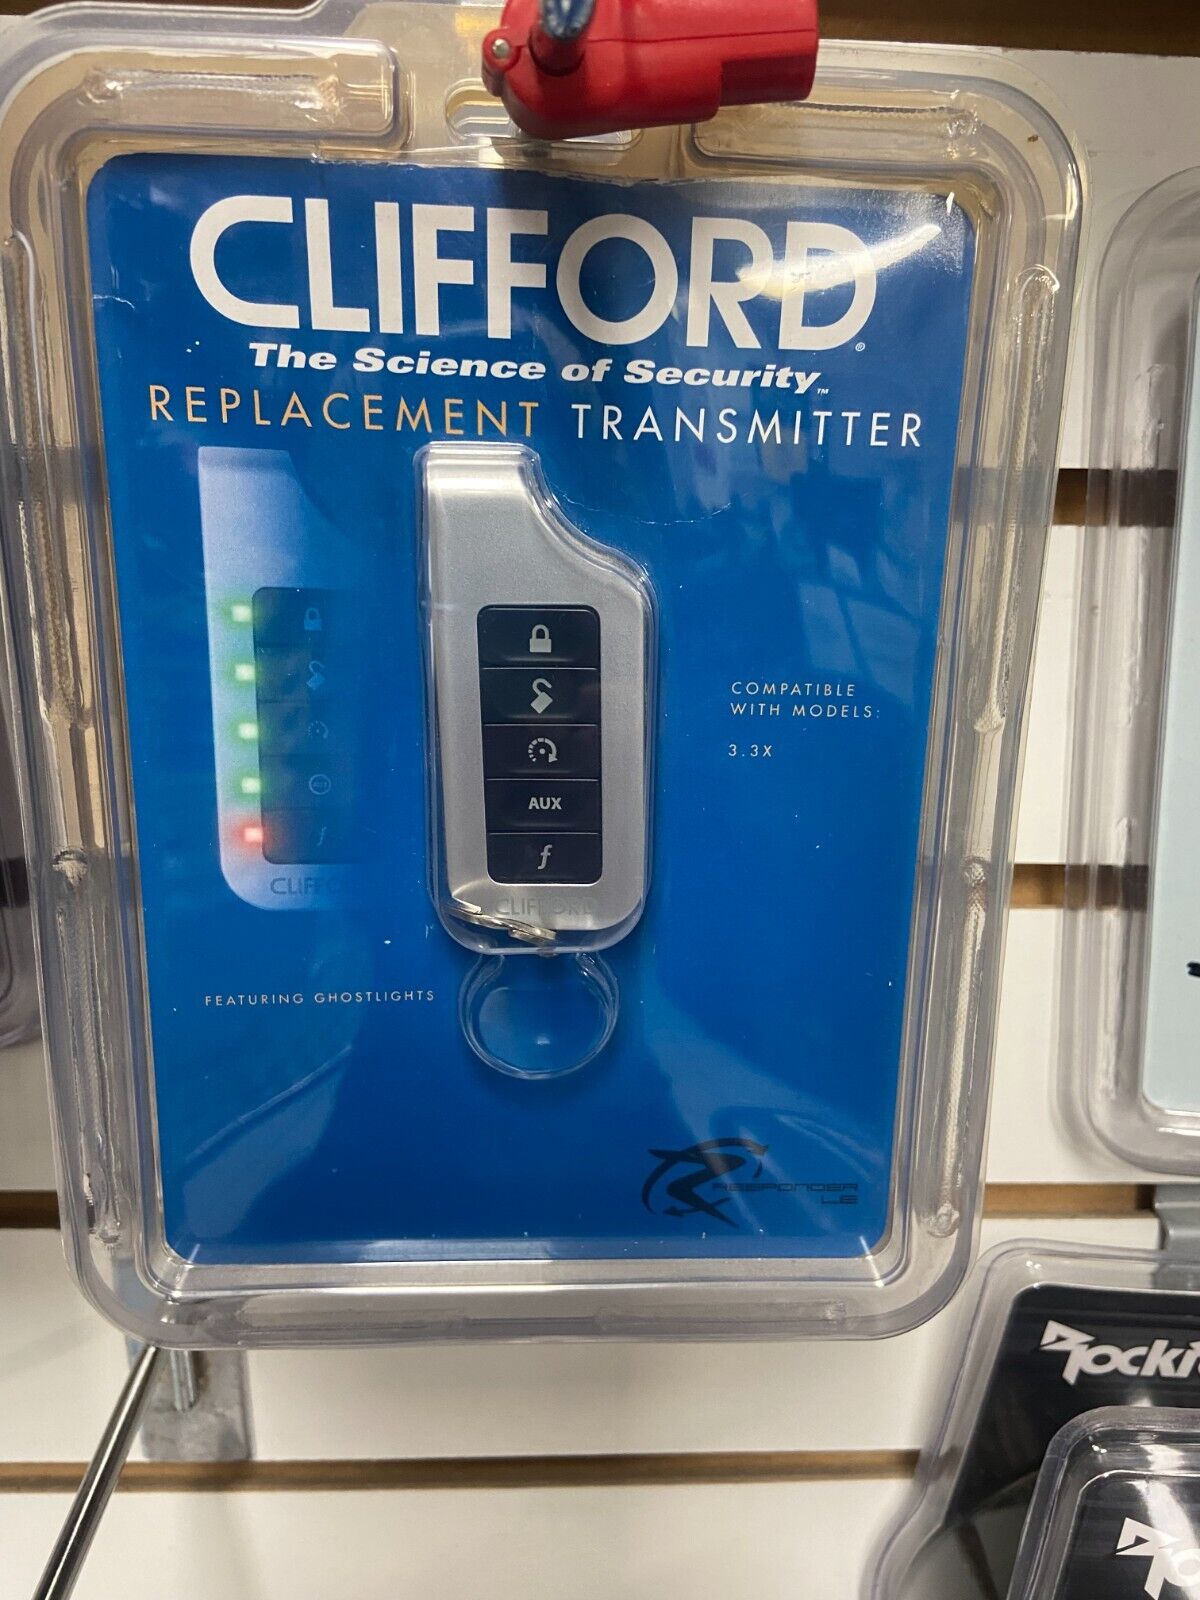 NEW GENUINE Clifford 7251X Responder LE Replacement Remote Control, 3.3x